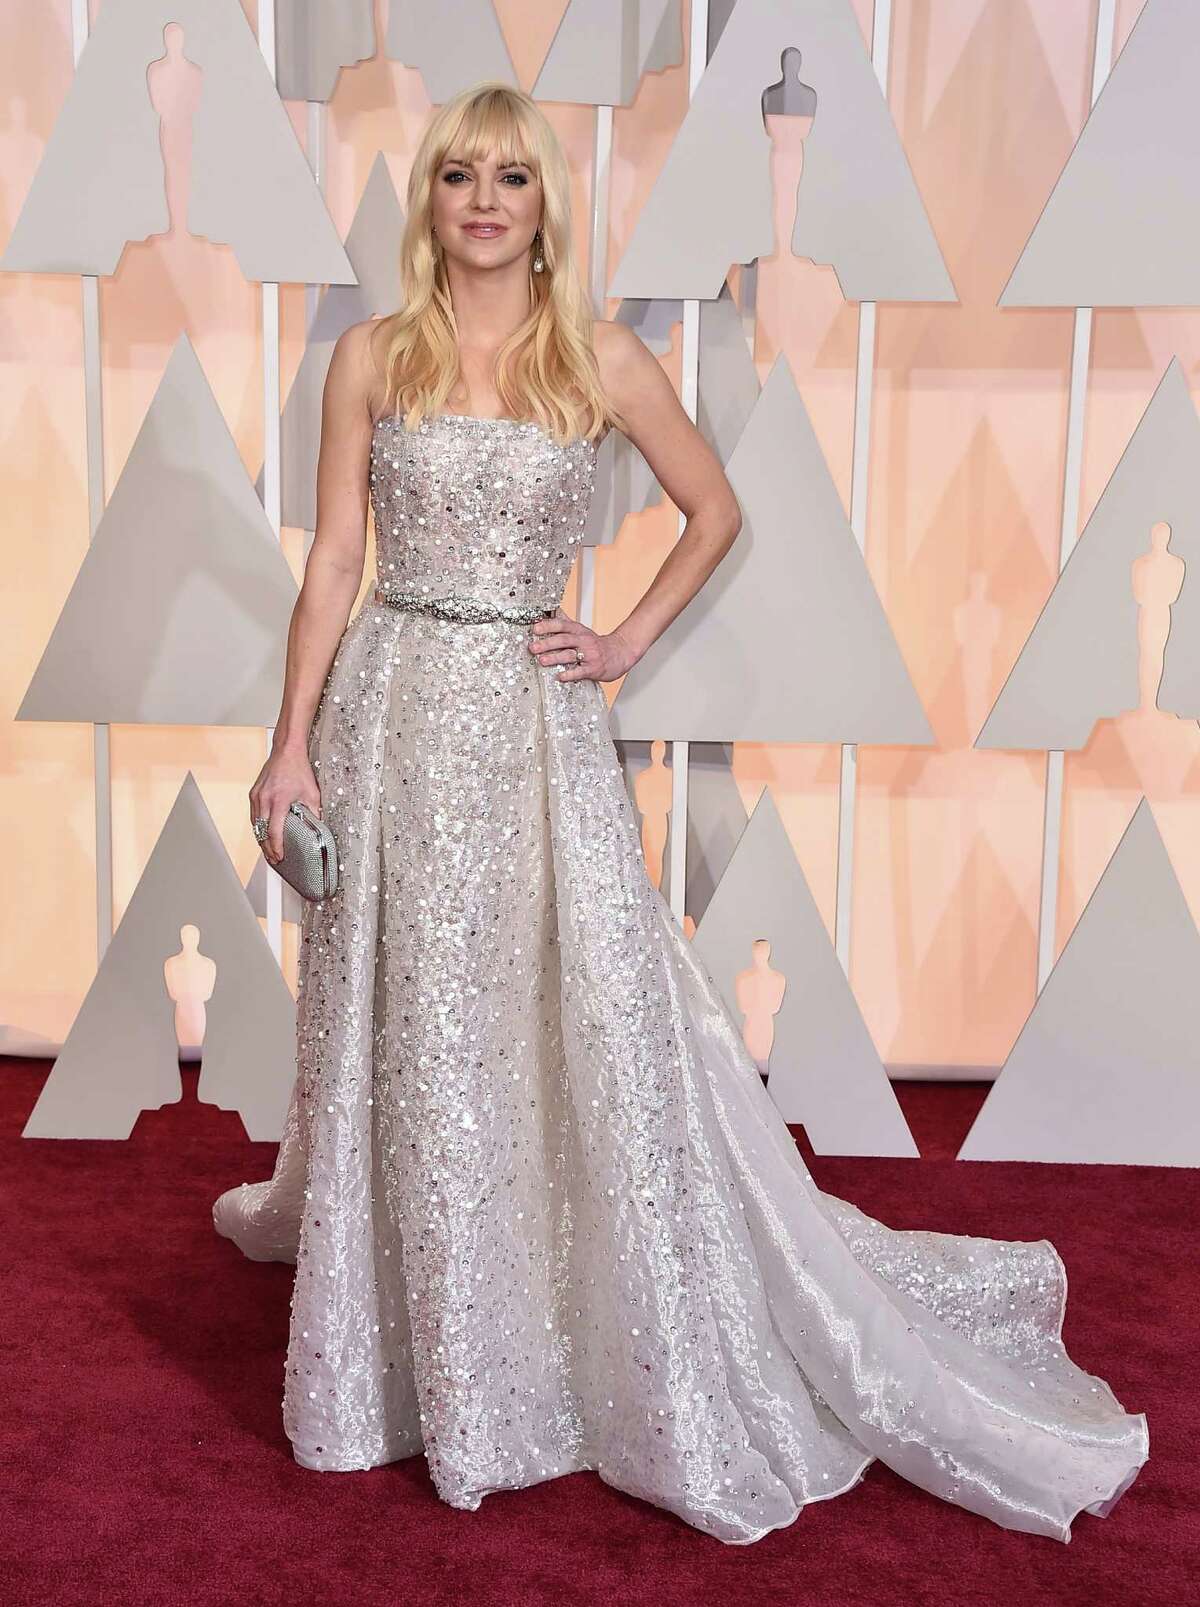 Anna Faris arrives at the Oscars on Sunday, Feb. 22, 2015, at the Dolby Theatre in Los Angeles. (Photo by Jordan Strauss/Invision/AP)